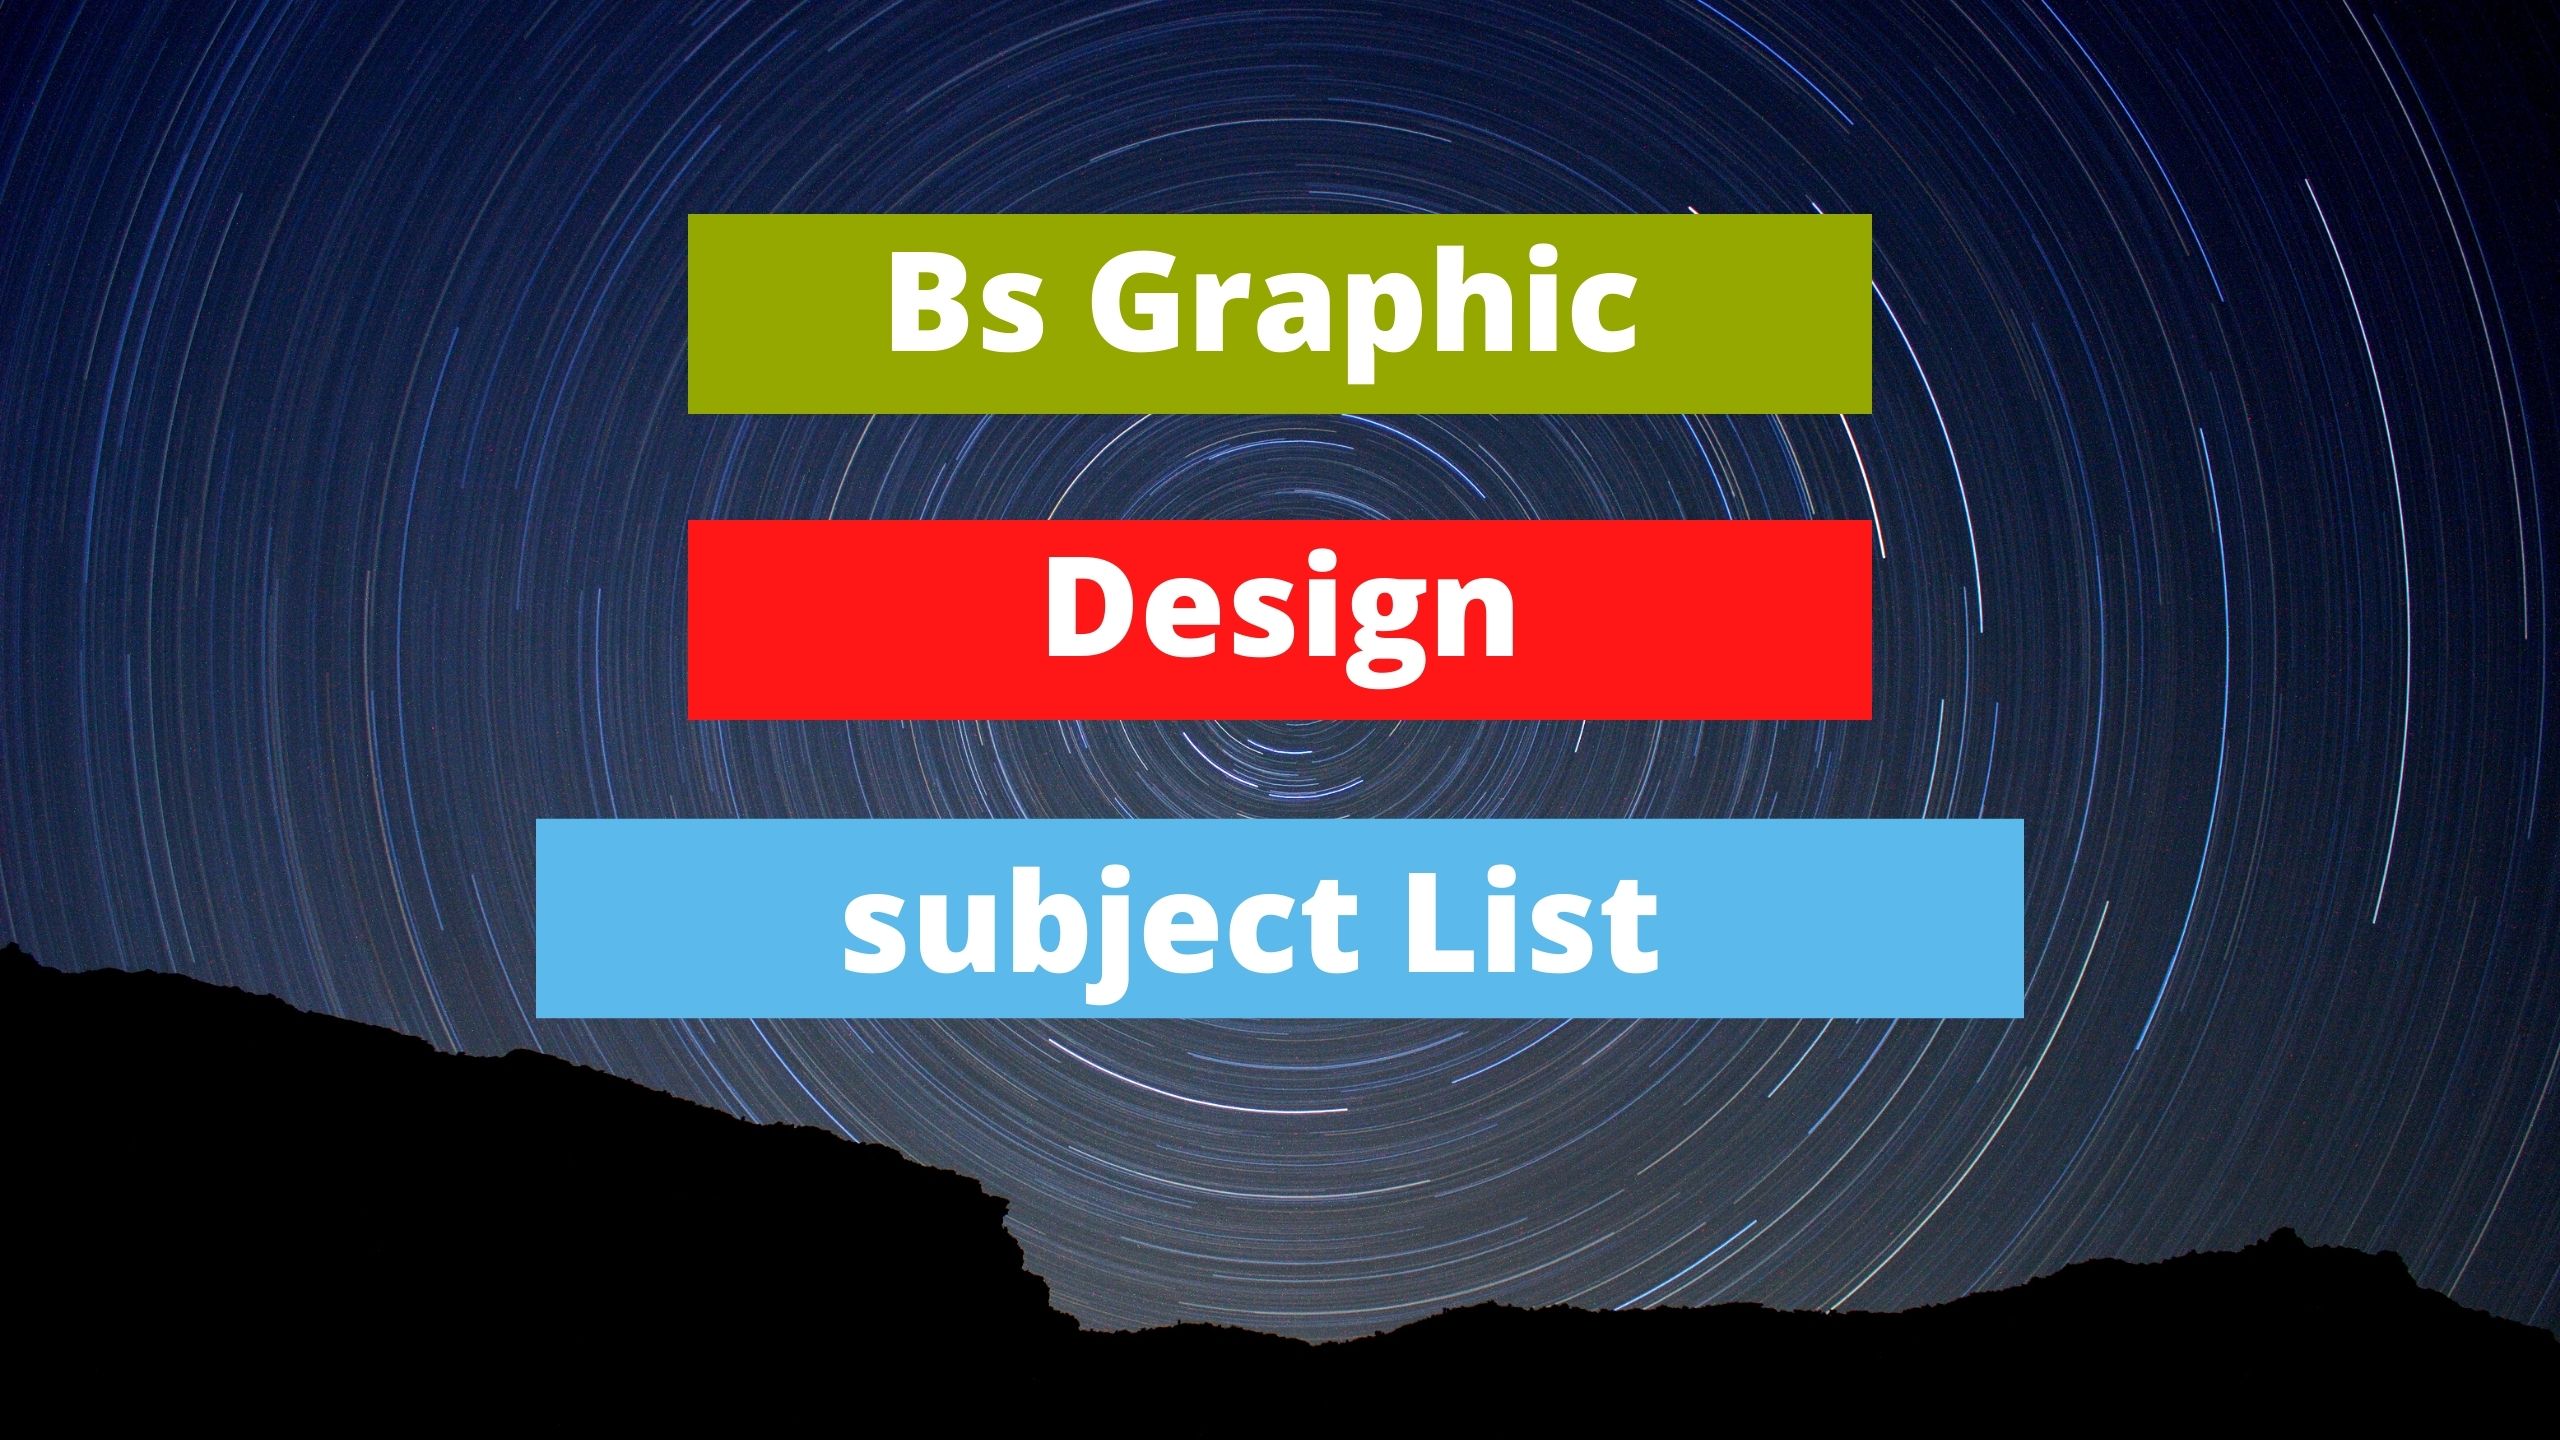 bs graphic design subjects list